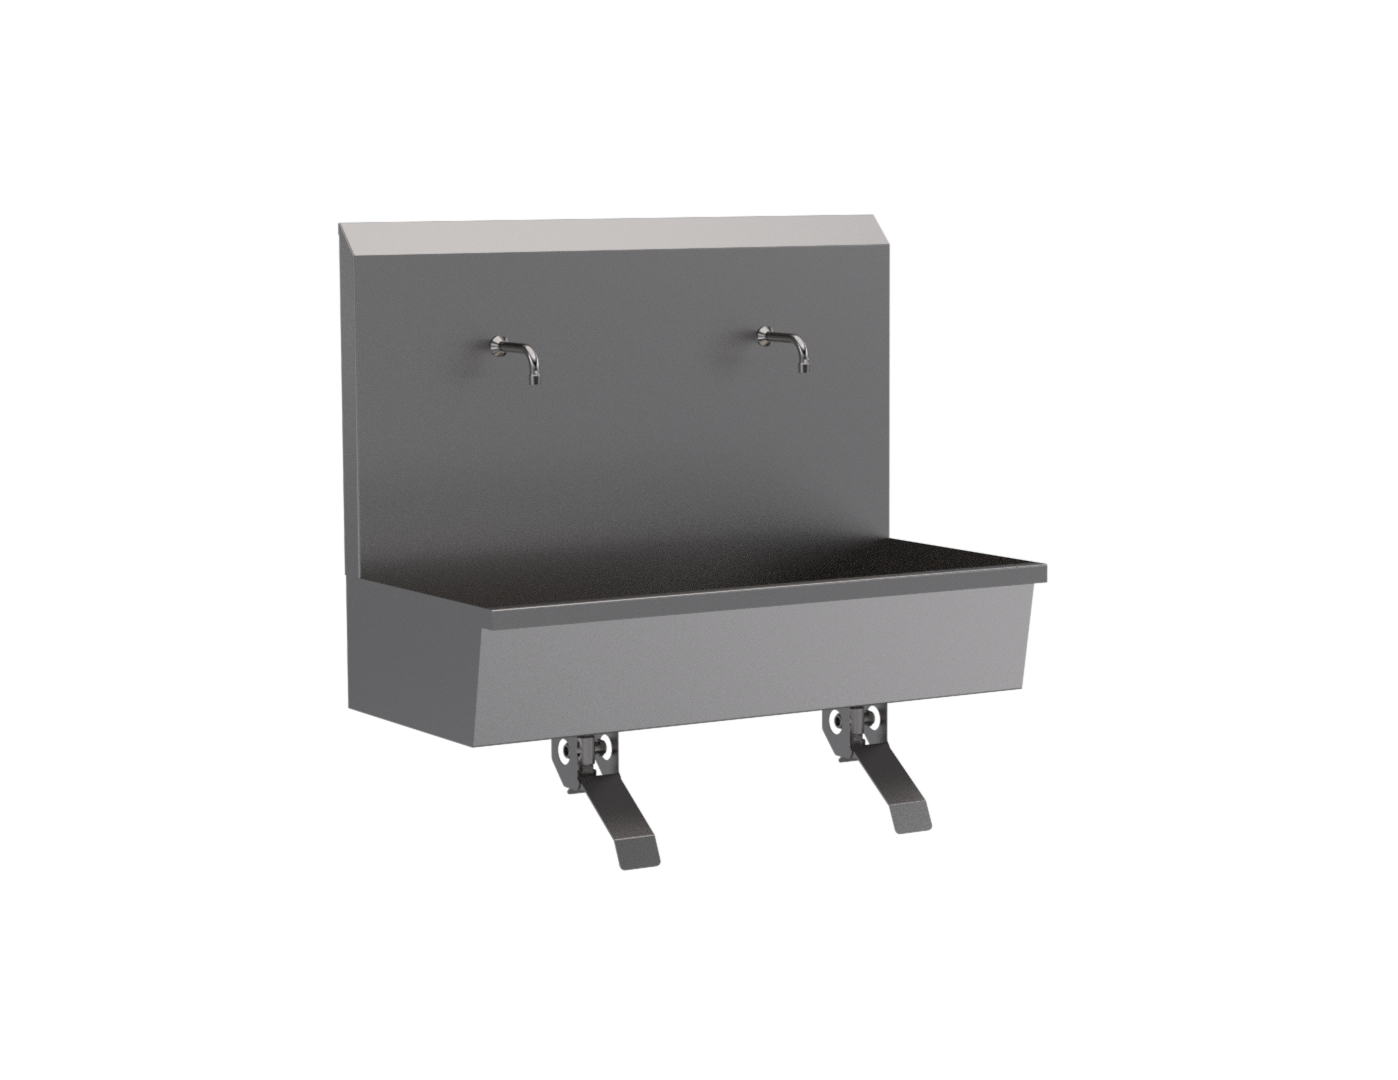 Stainless steel two station scrub sink